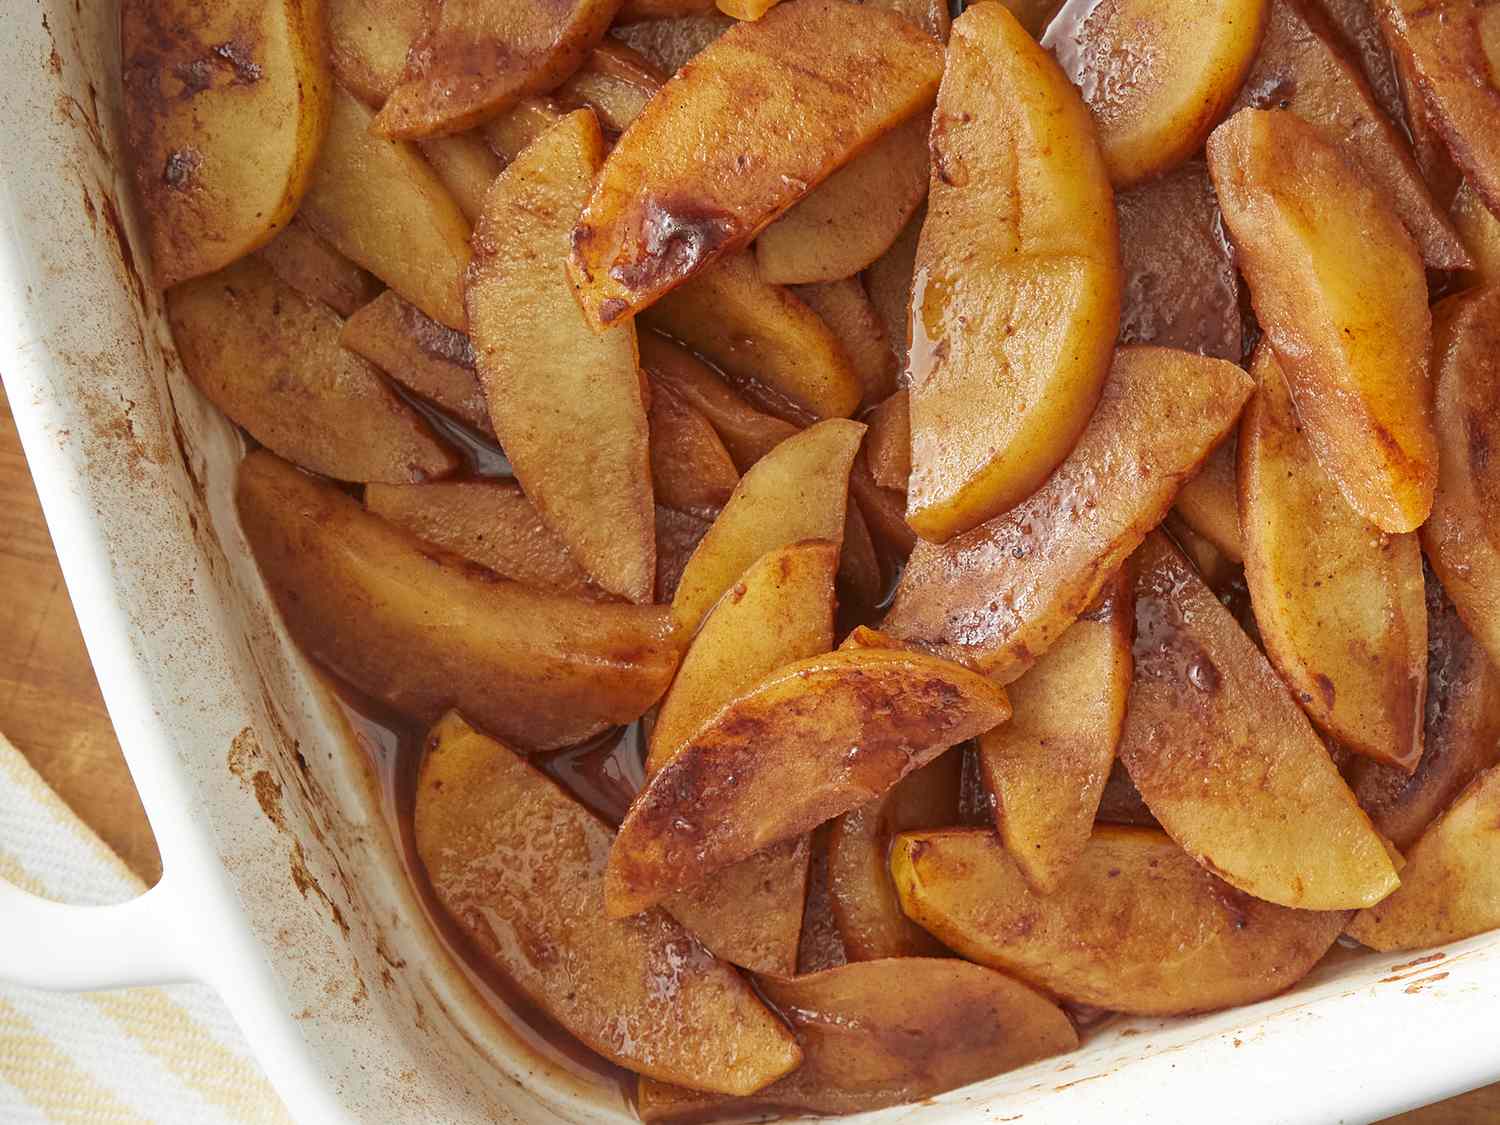 Looking down at a casserole dish of sliced cinnamon baked apples